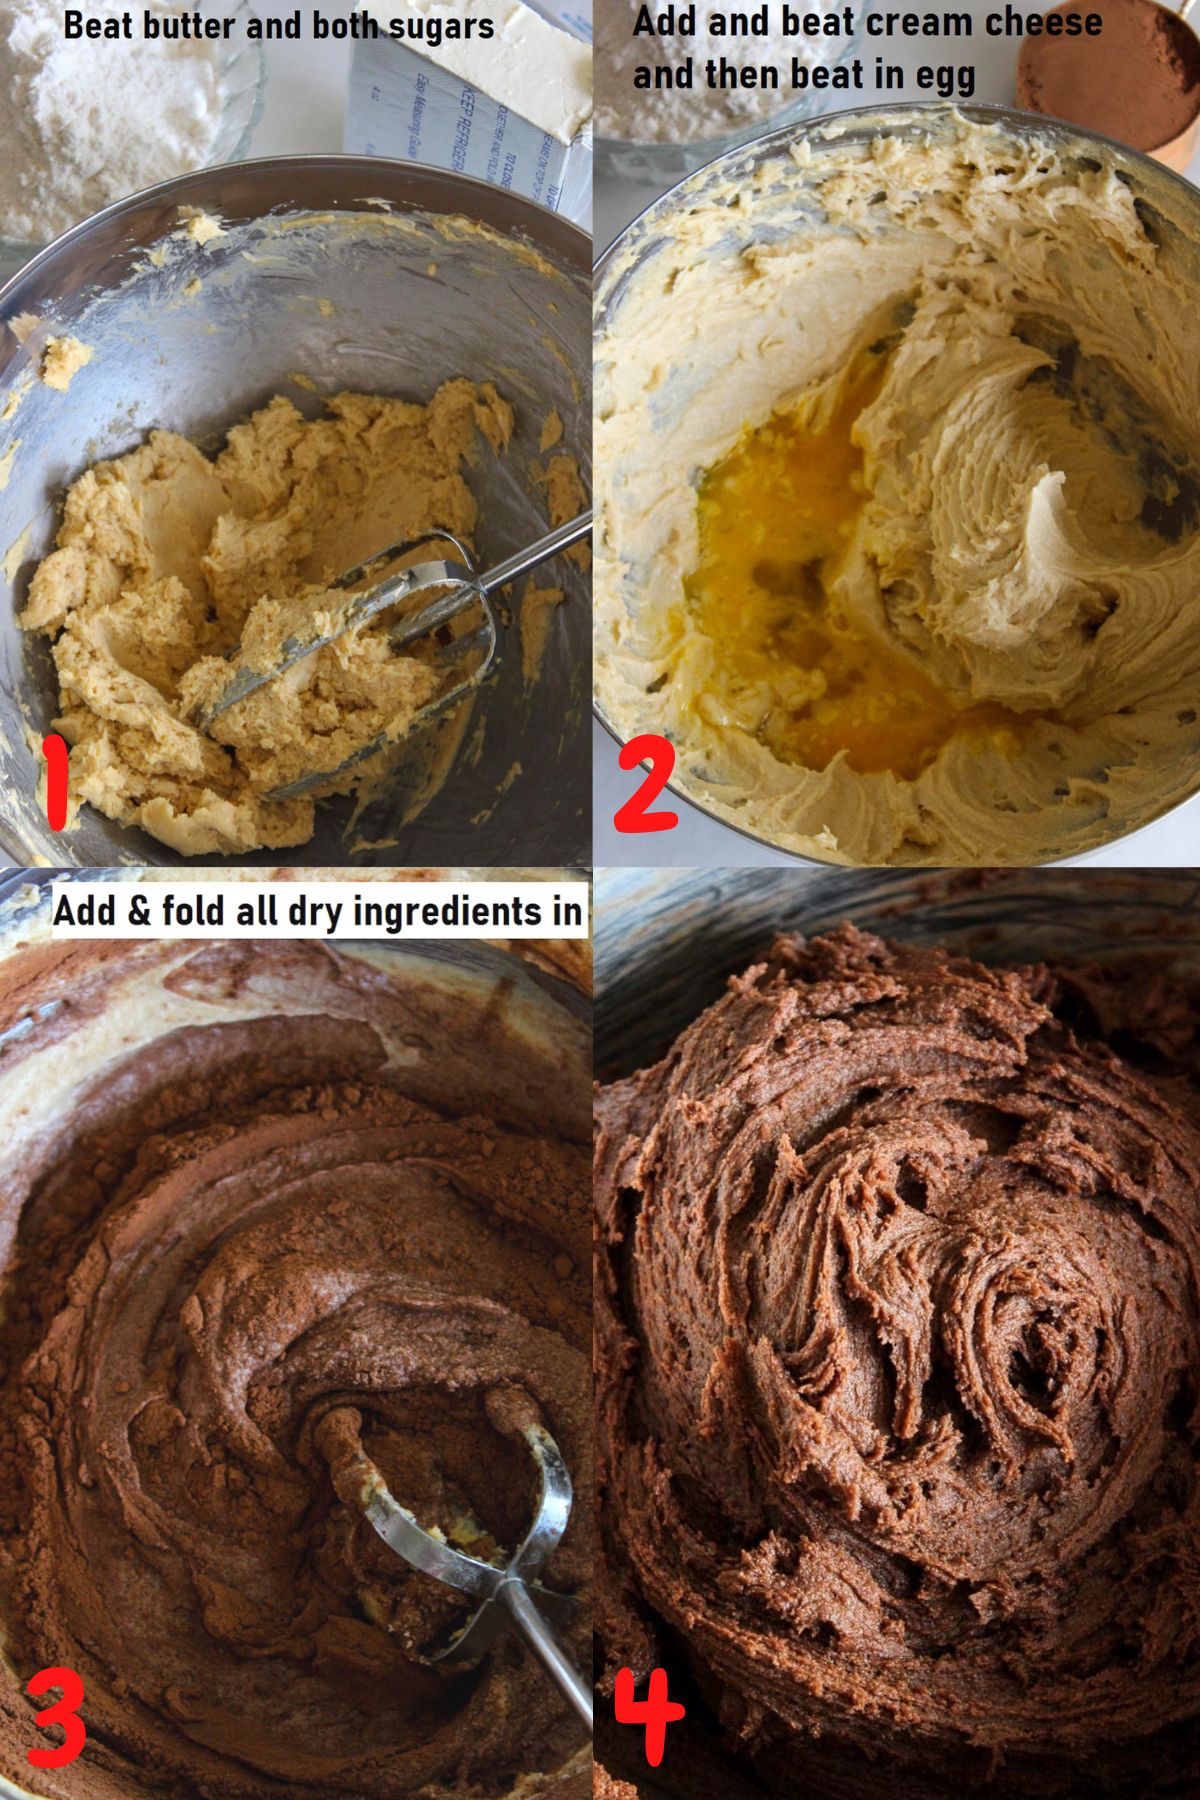 Step by step process of how to make double chocolate cookies from scratch.